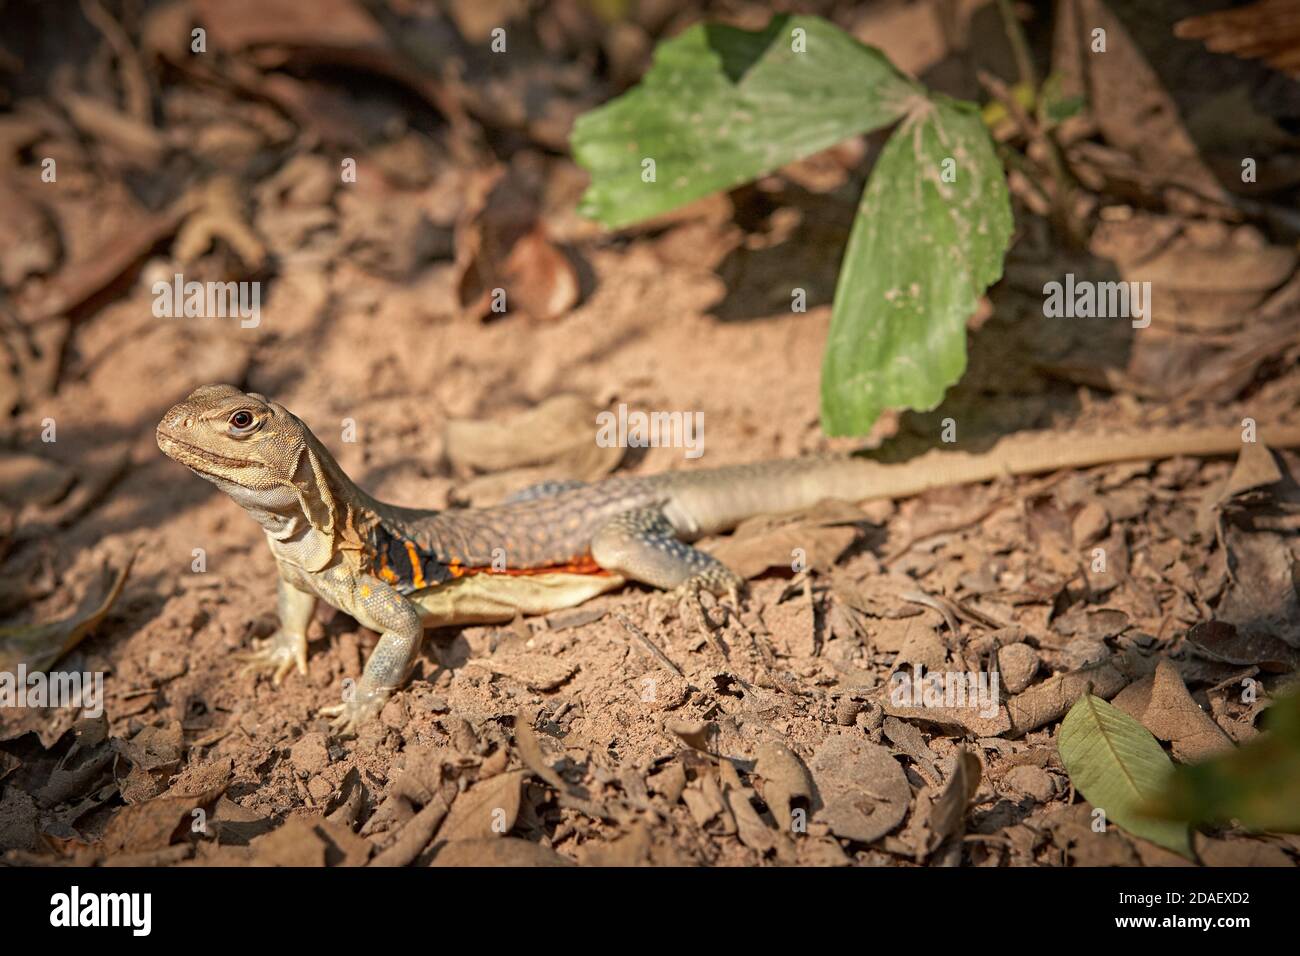 Udon Thani, Thailand. February 2012. Butterfly lizard (Leiolepis belliana). Stock Photo